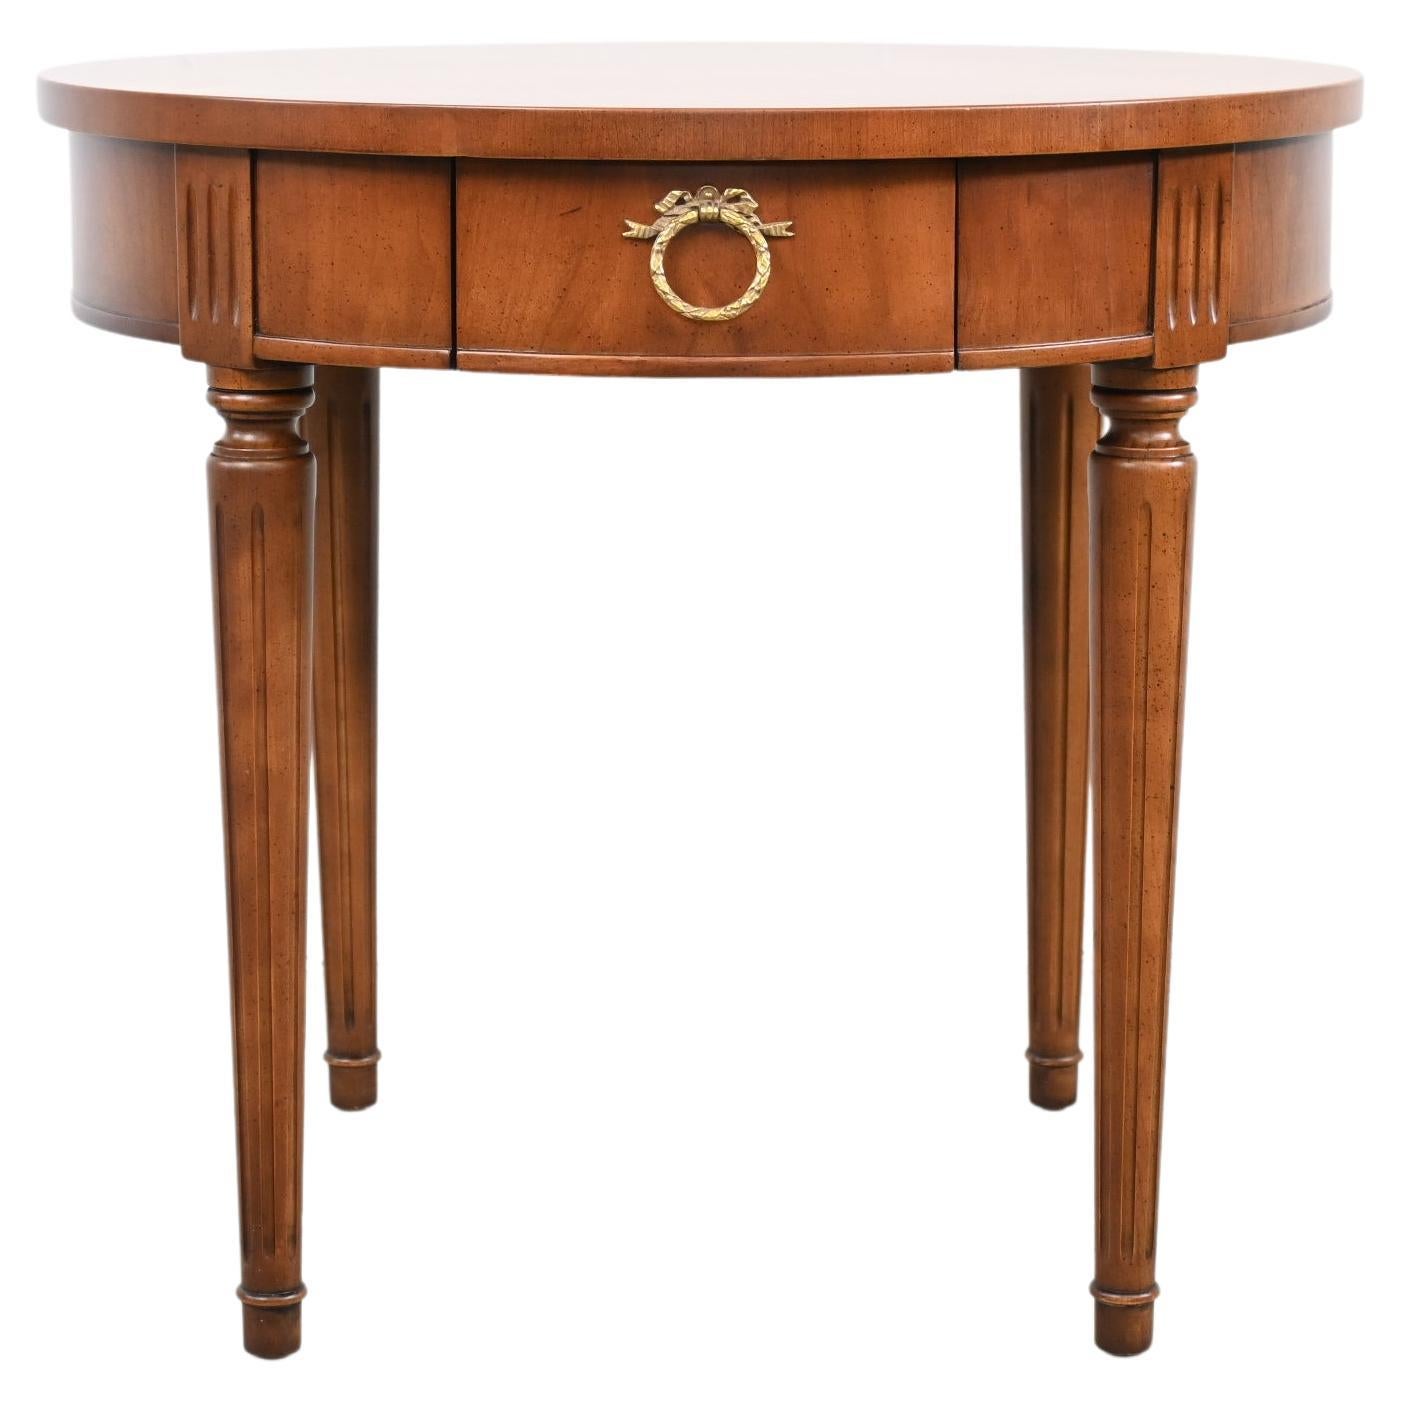 Kindel Furniture Neoclassical Style Round Side or End Table